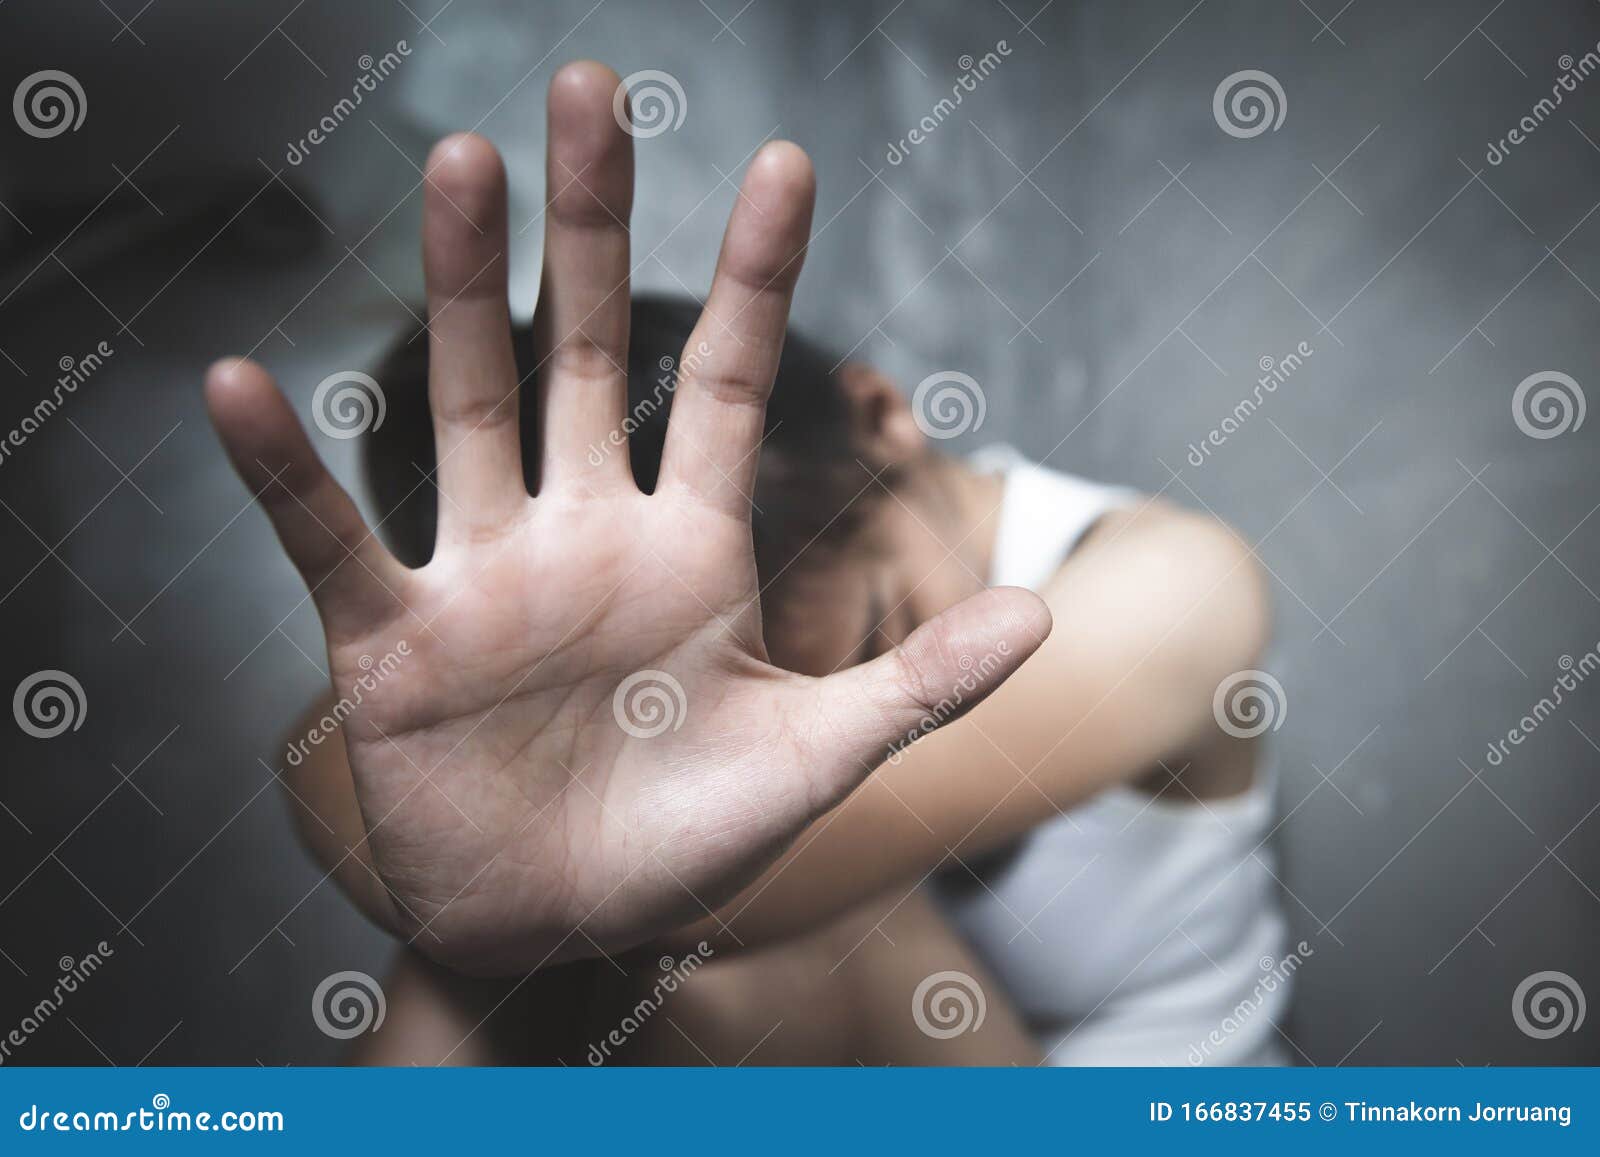 Stop Sexual Harassment and Violence Against Women, and Sexual Abuse Concept, the Concept of Stopping Violence Against Women Stock Image